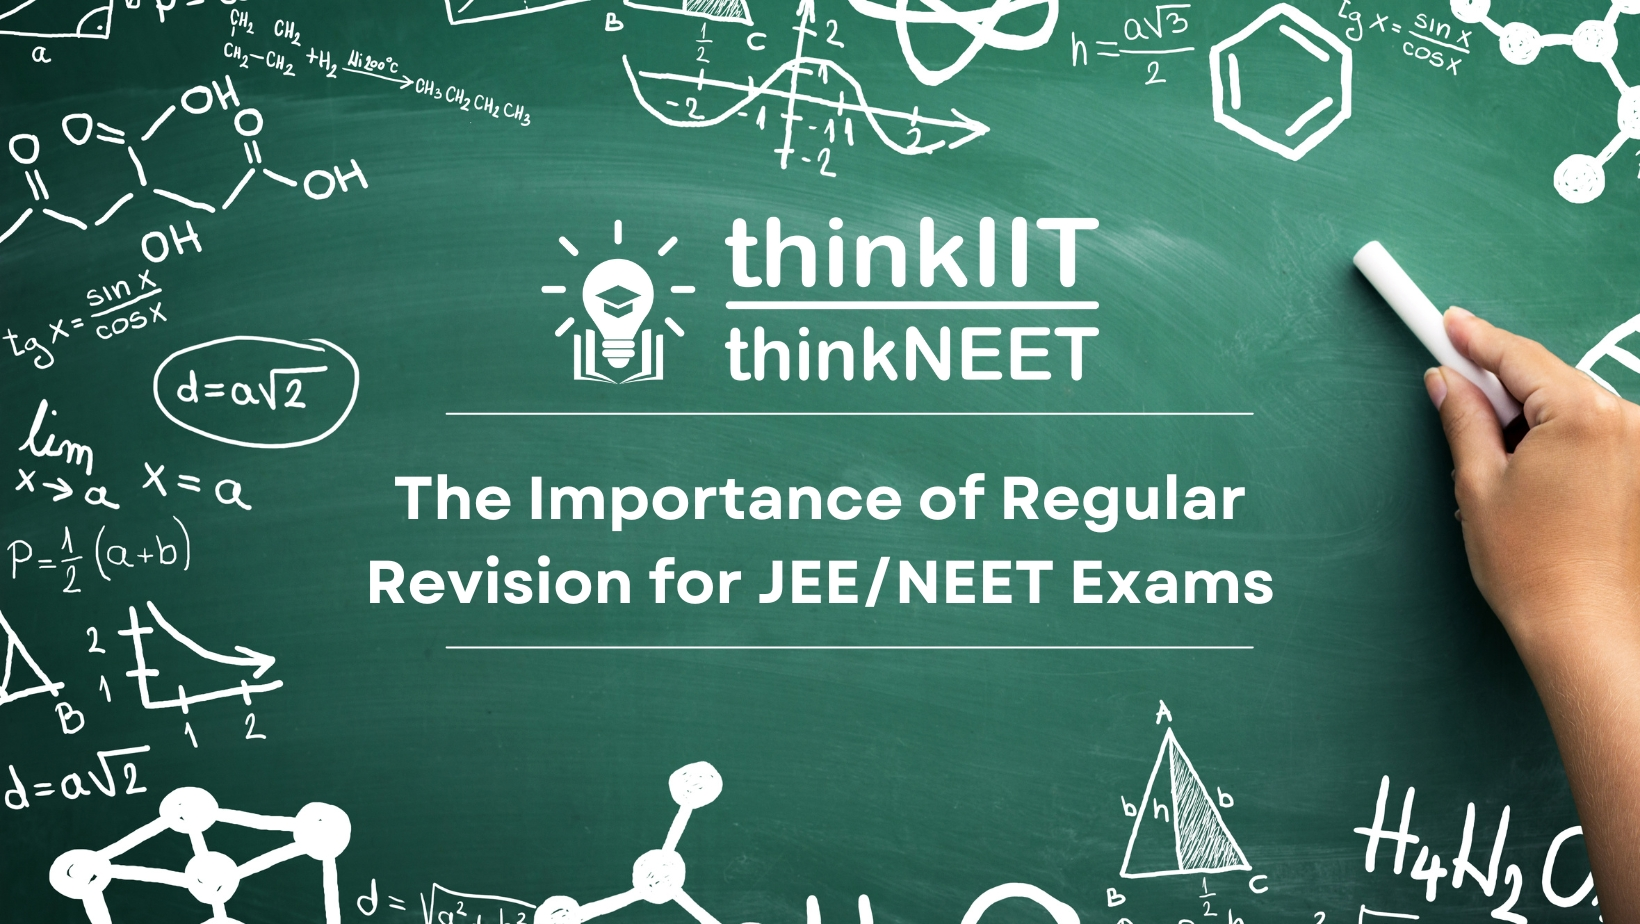 Importance of Regular Revision for JEE/NEET Exam